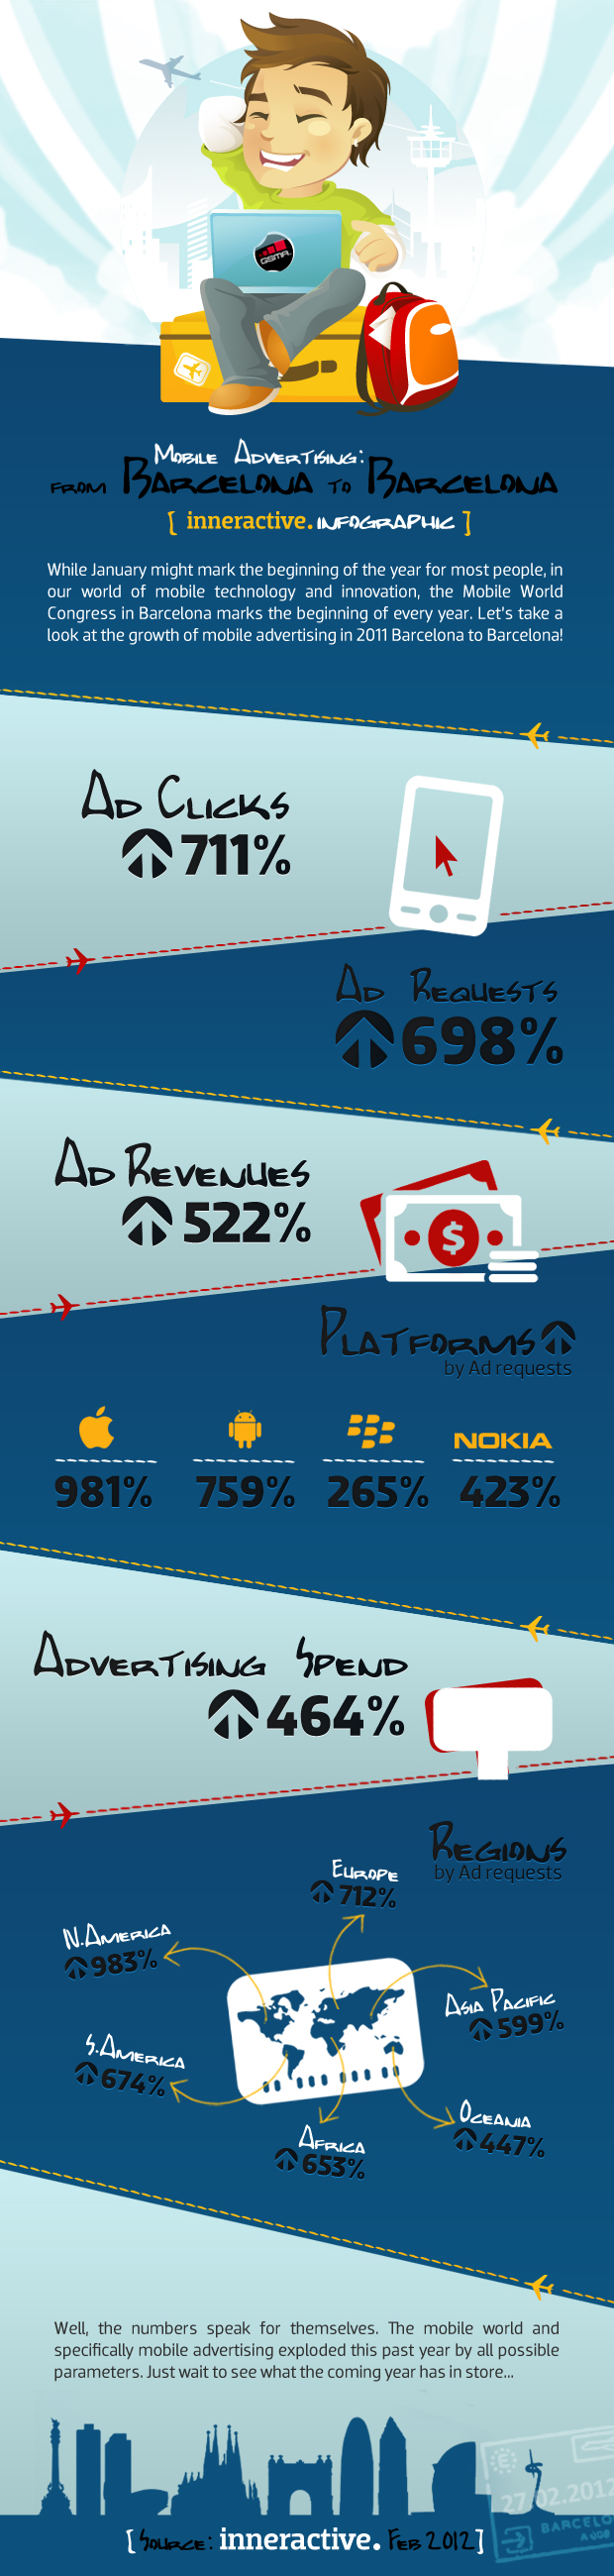 Mobile-Advertising-Infographic-The-Growth-of-Mobile-Advertising-in-2011